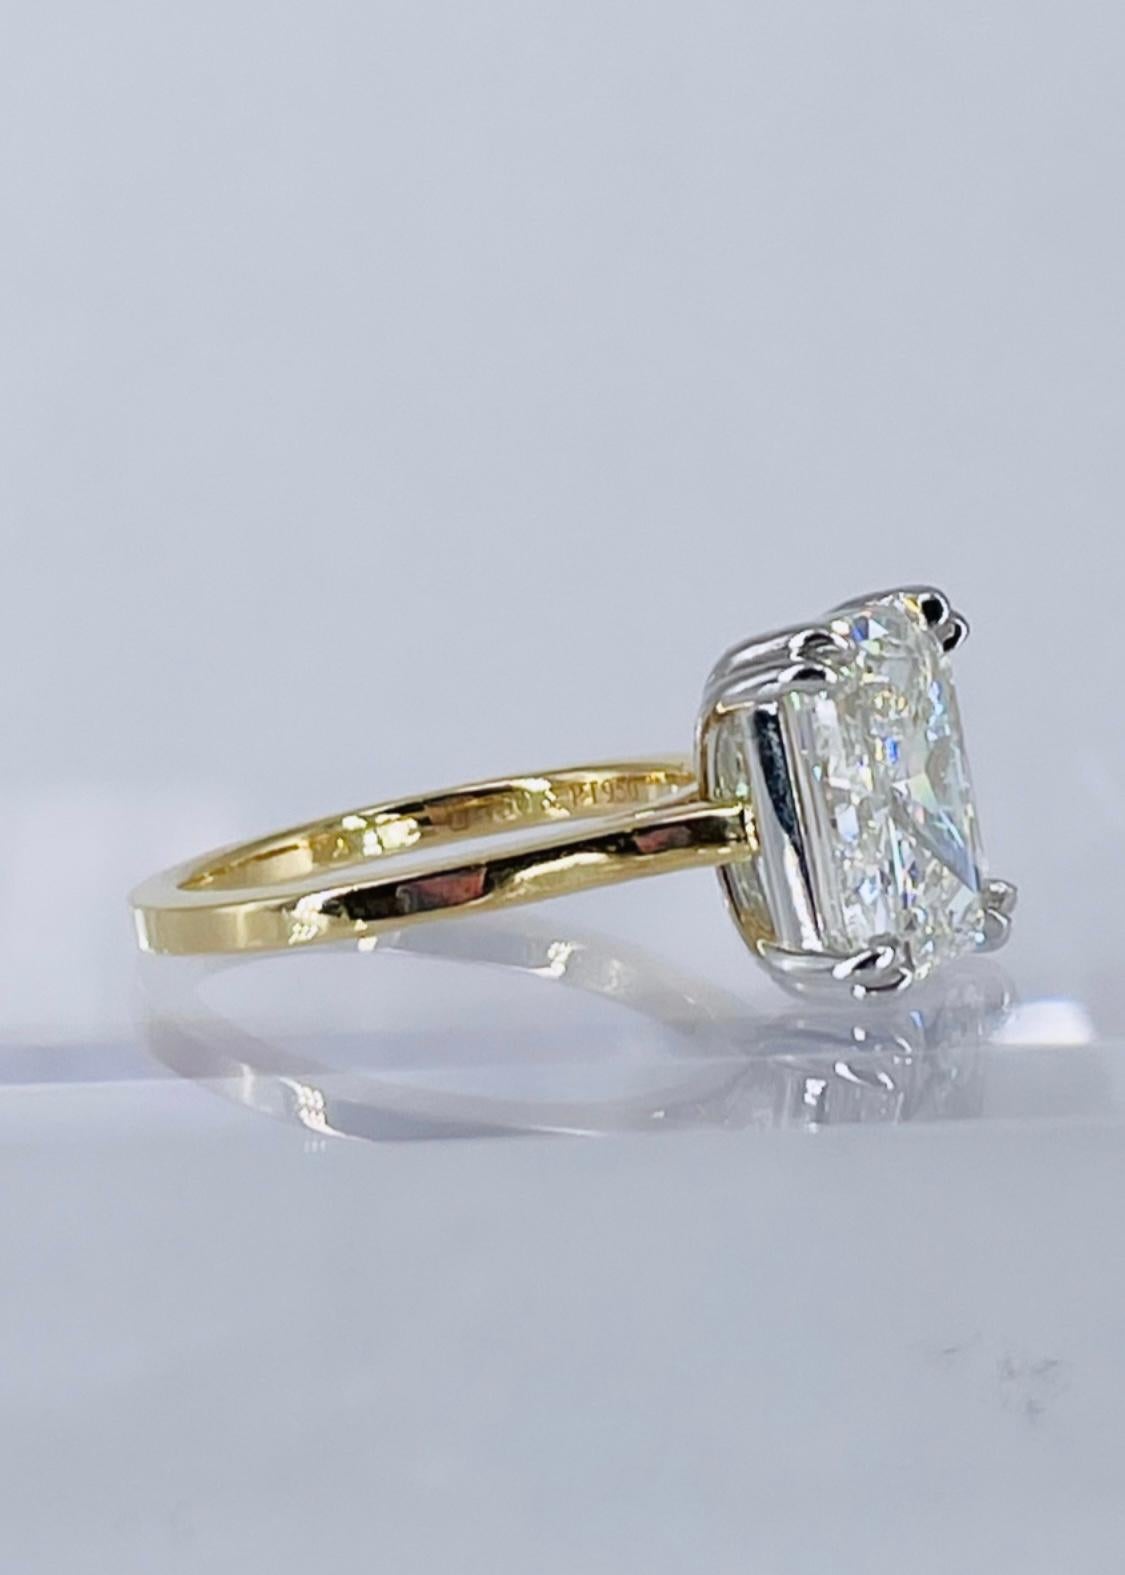 Sparkling and sophisticated, this elegant engagement ring by J. Birnbach is a beautiful execution of the modern solitaire. The ring showcases a 5.01 carat GIA certified radiant cut diamond, with K color and SI2 clarity. The diamond is set in a